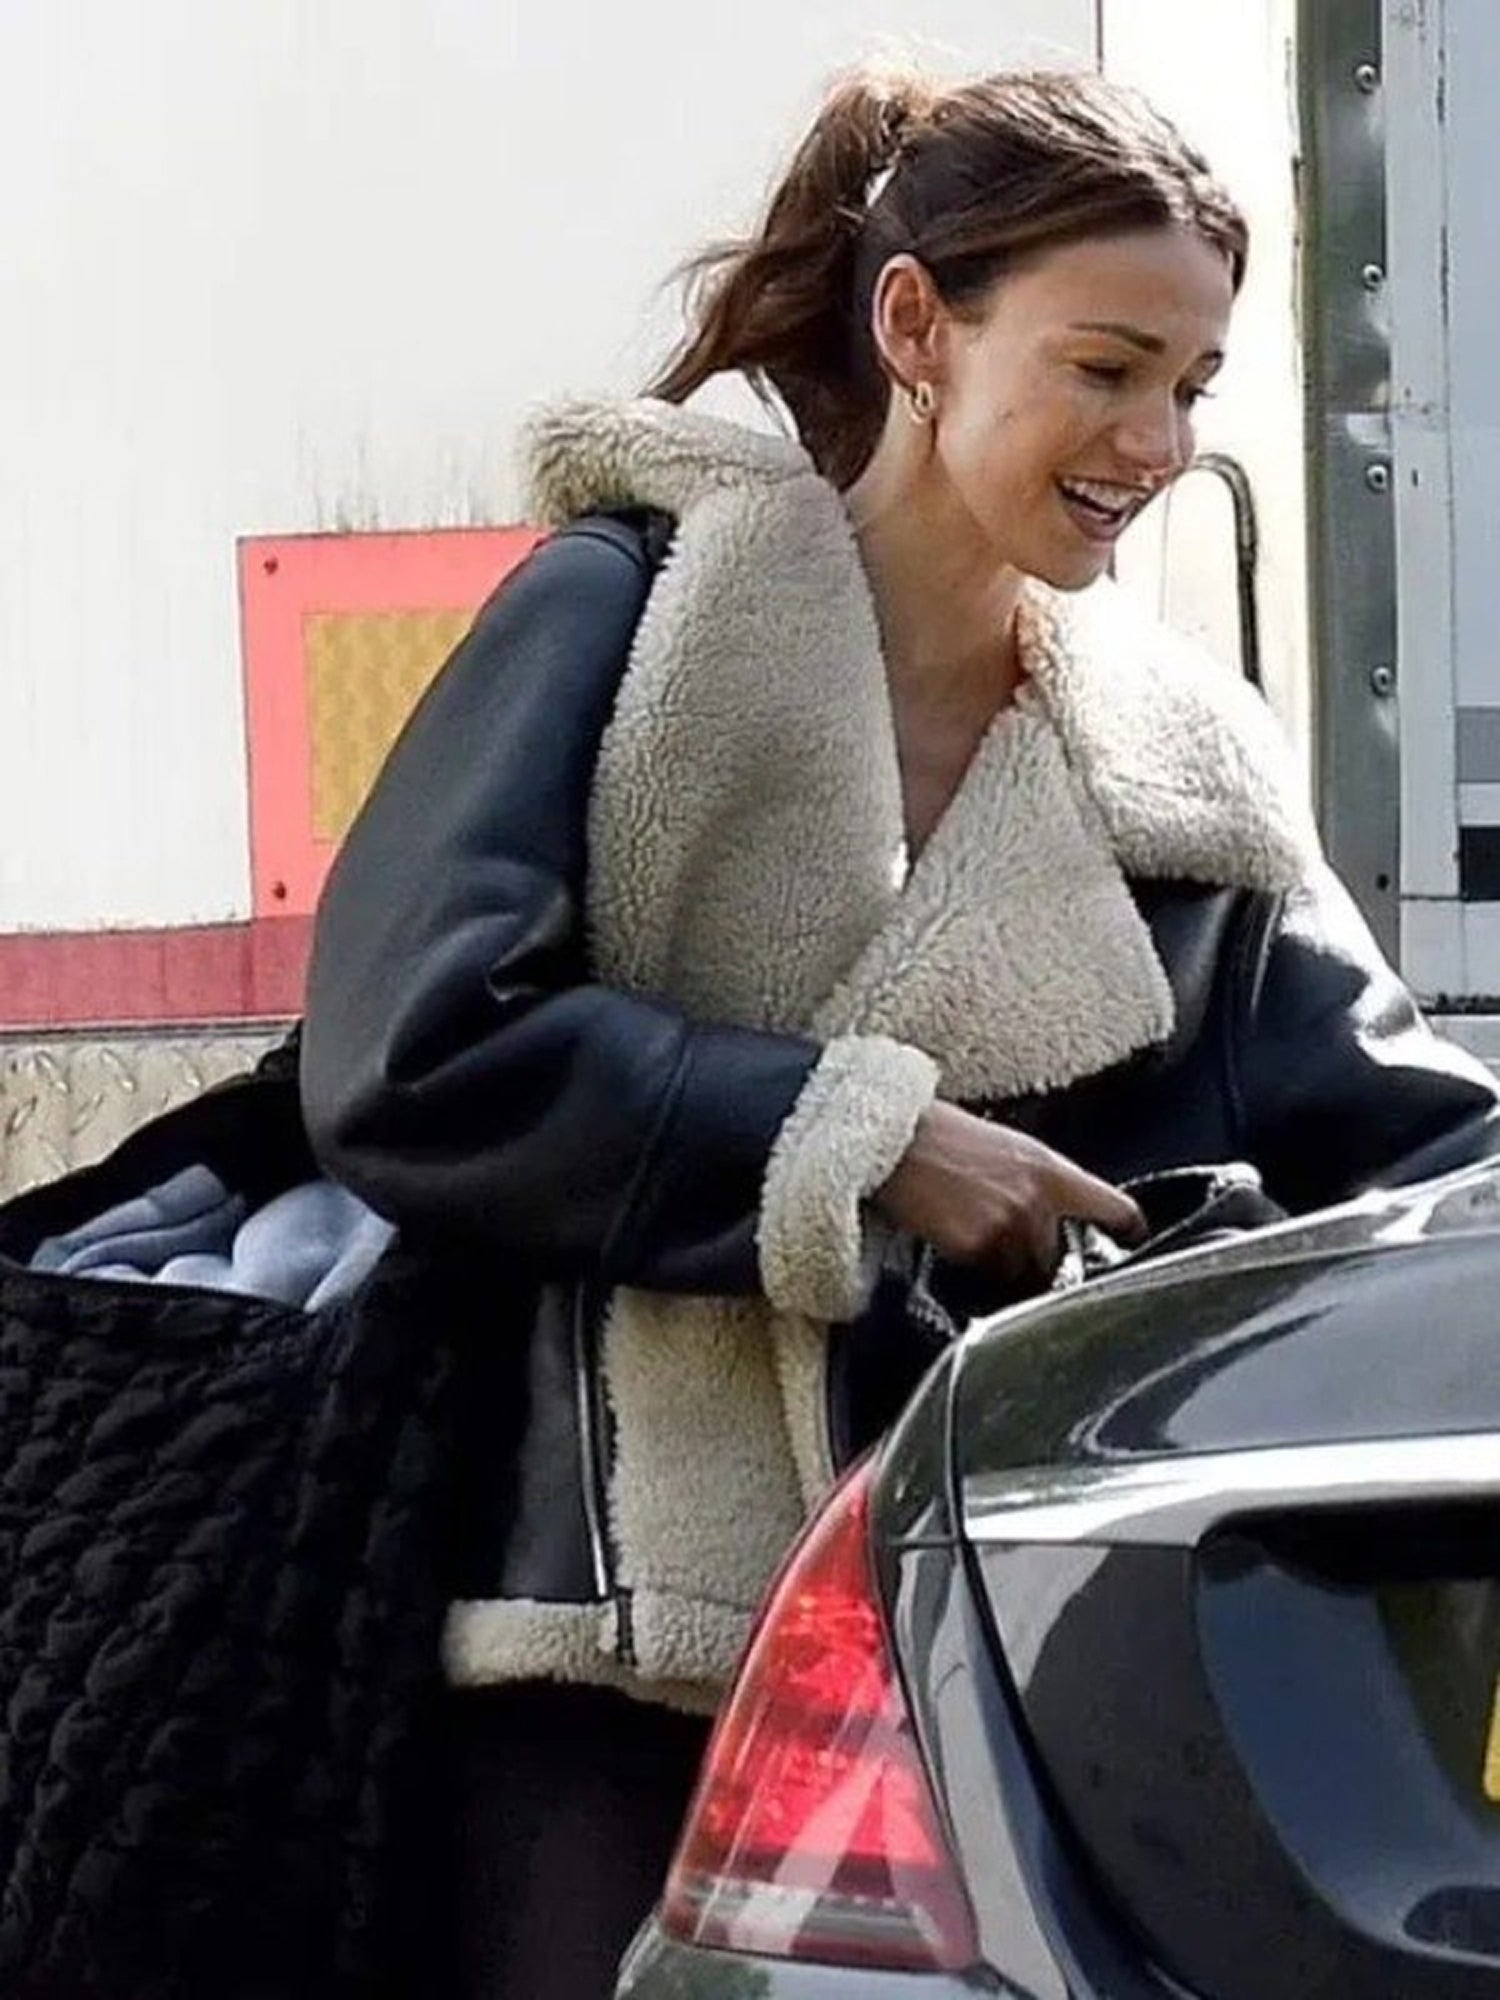 Michelle Keegan Fool Me Once Leather Shearling Jacket